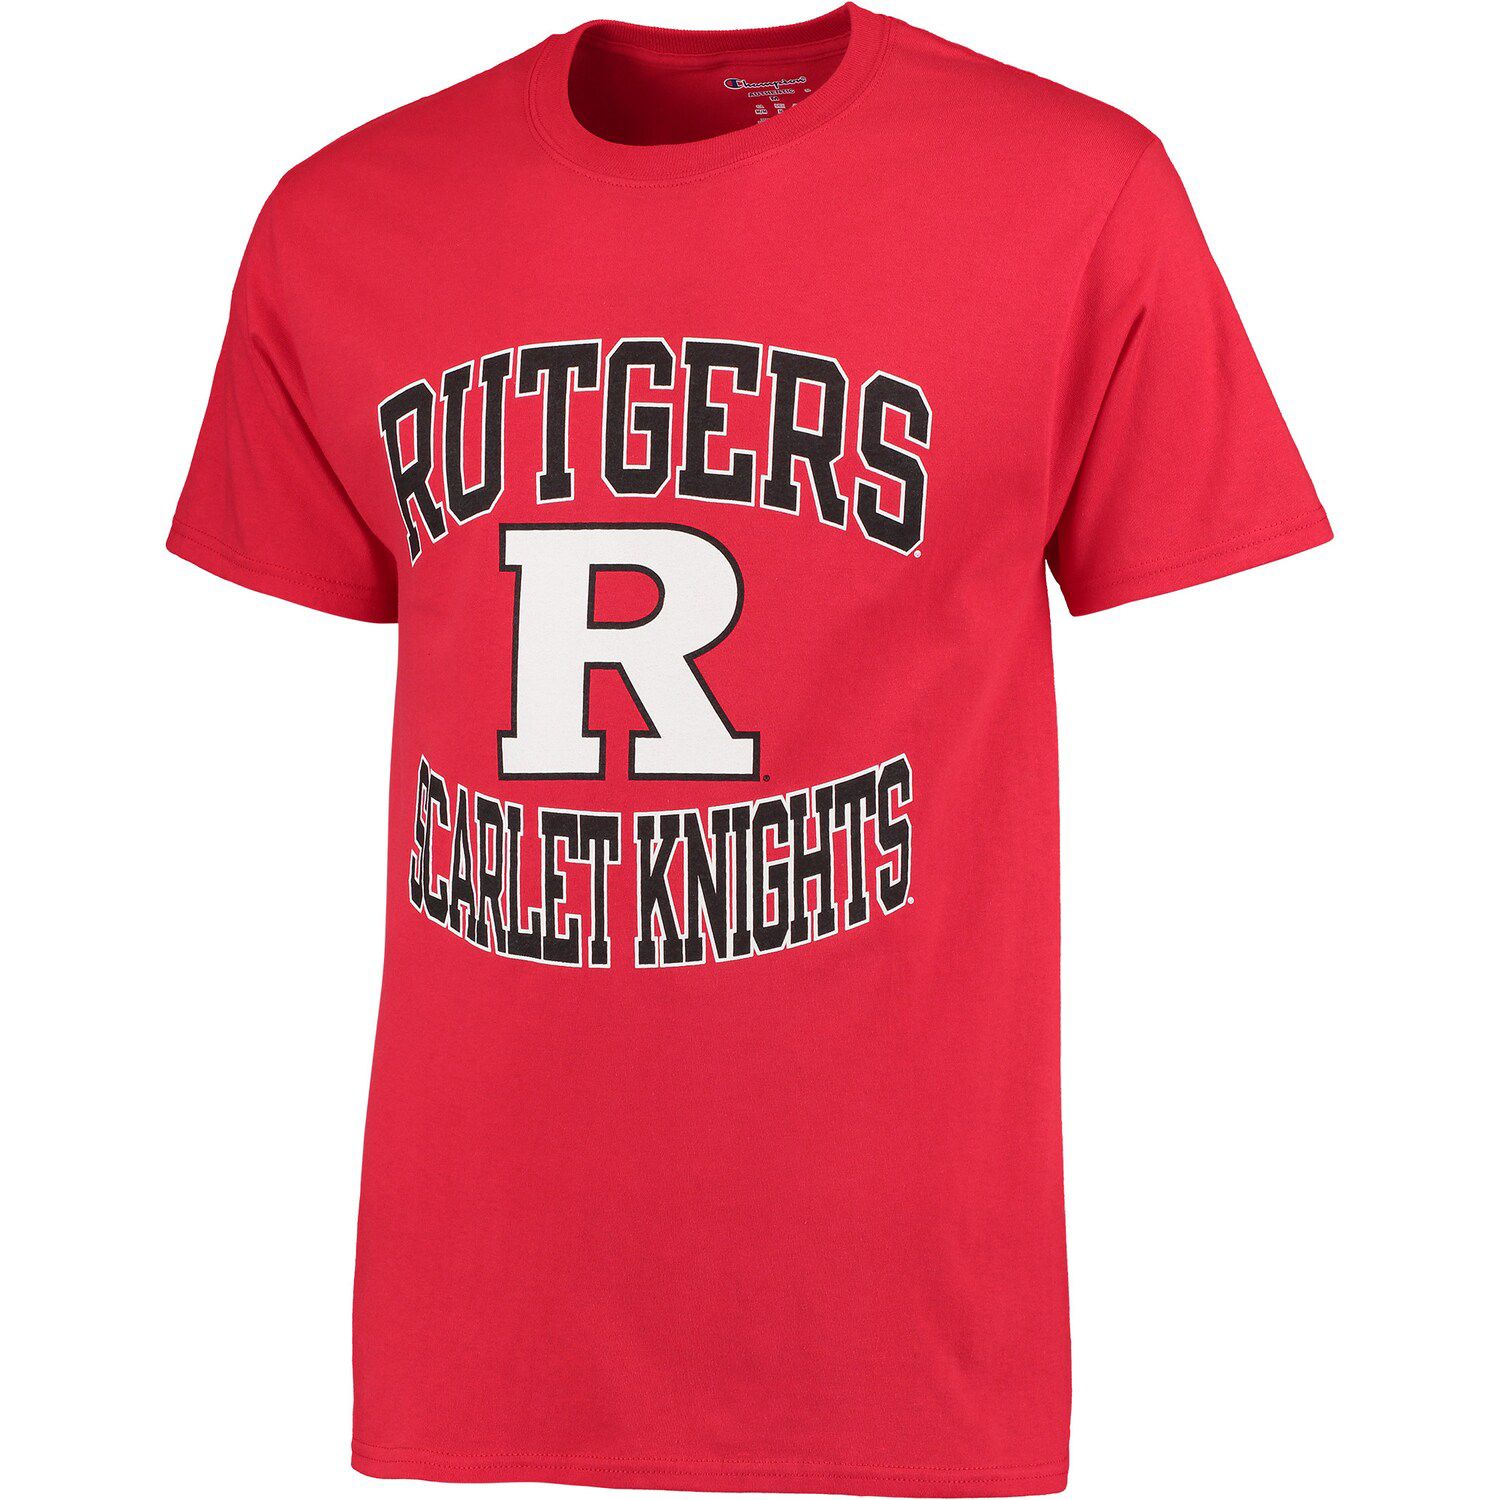 Rutgers Scarlet Knights Tradition T-Shirt